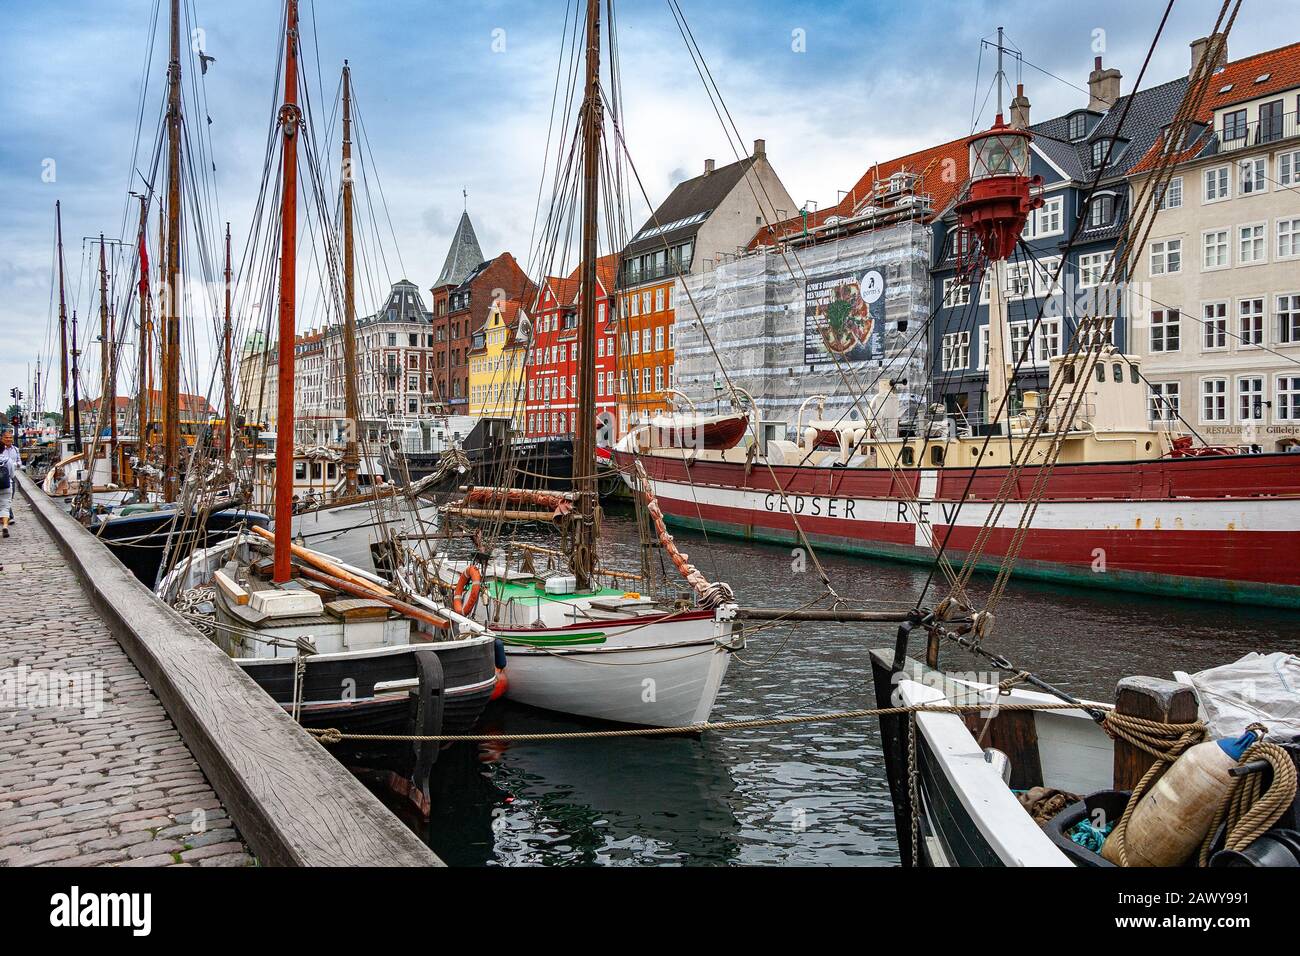 Gedser Rev, nave museo sul canale Nyhavn Foto Stock